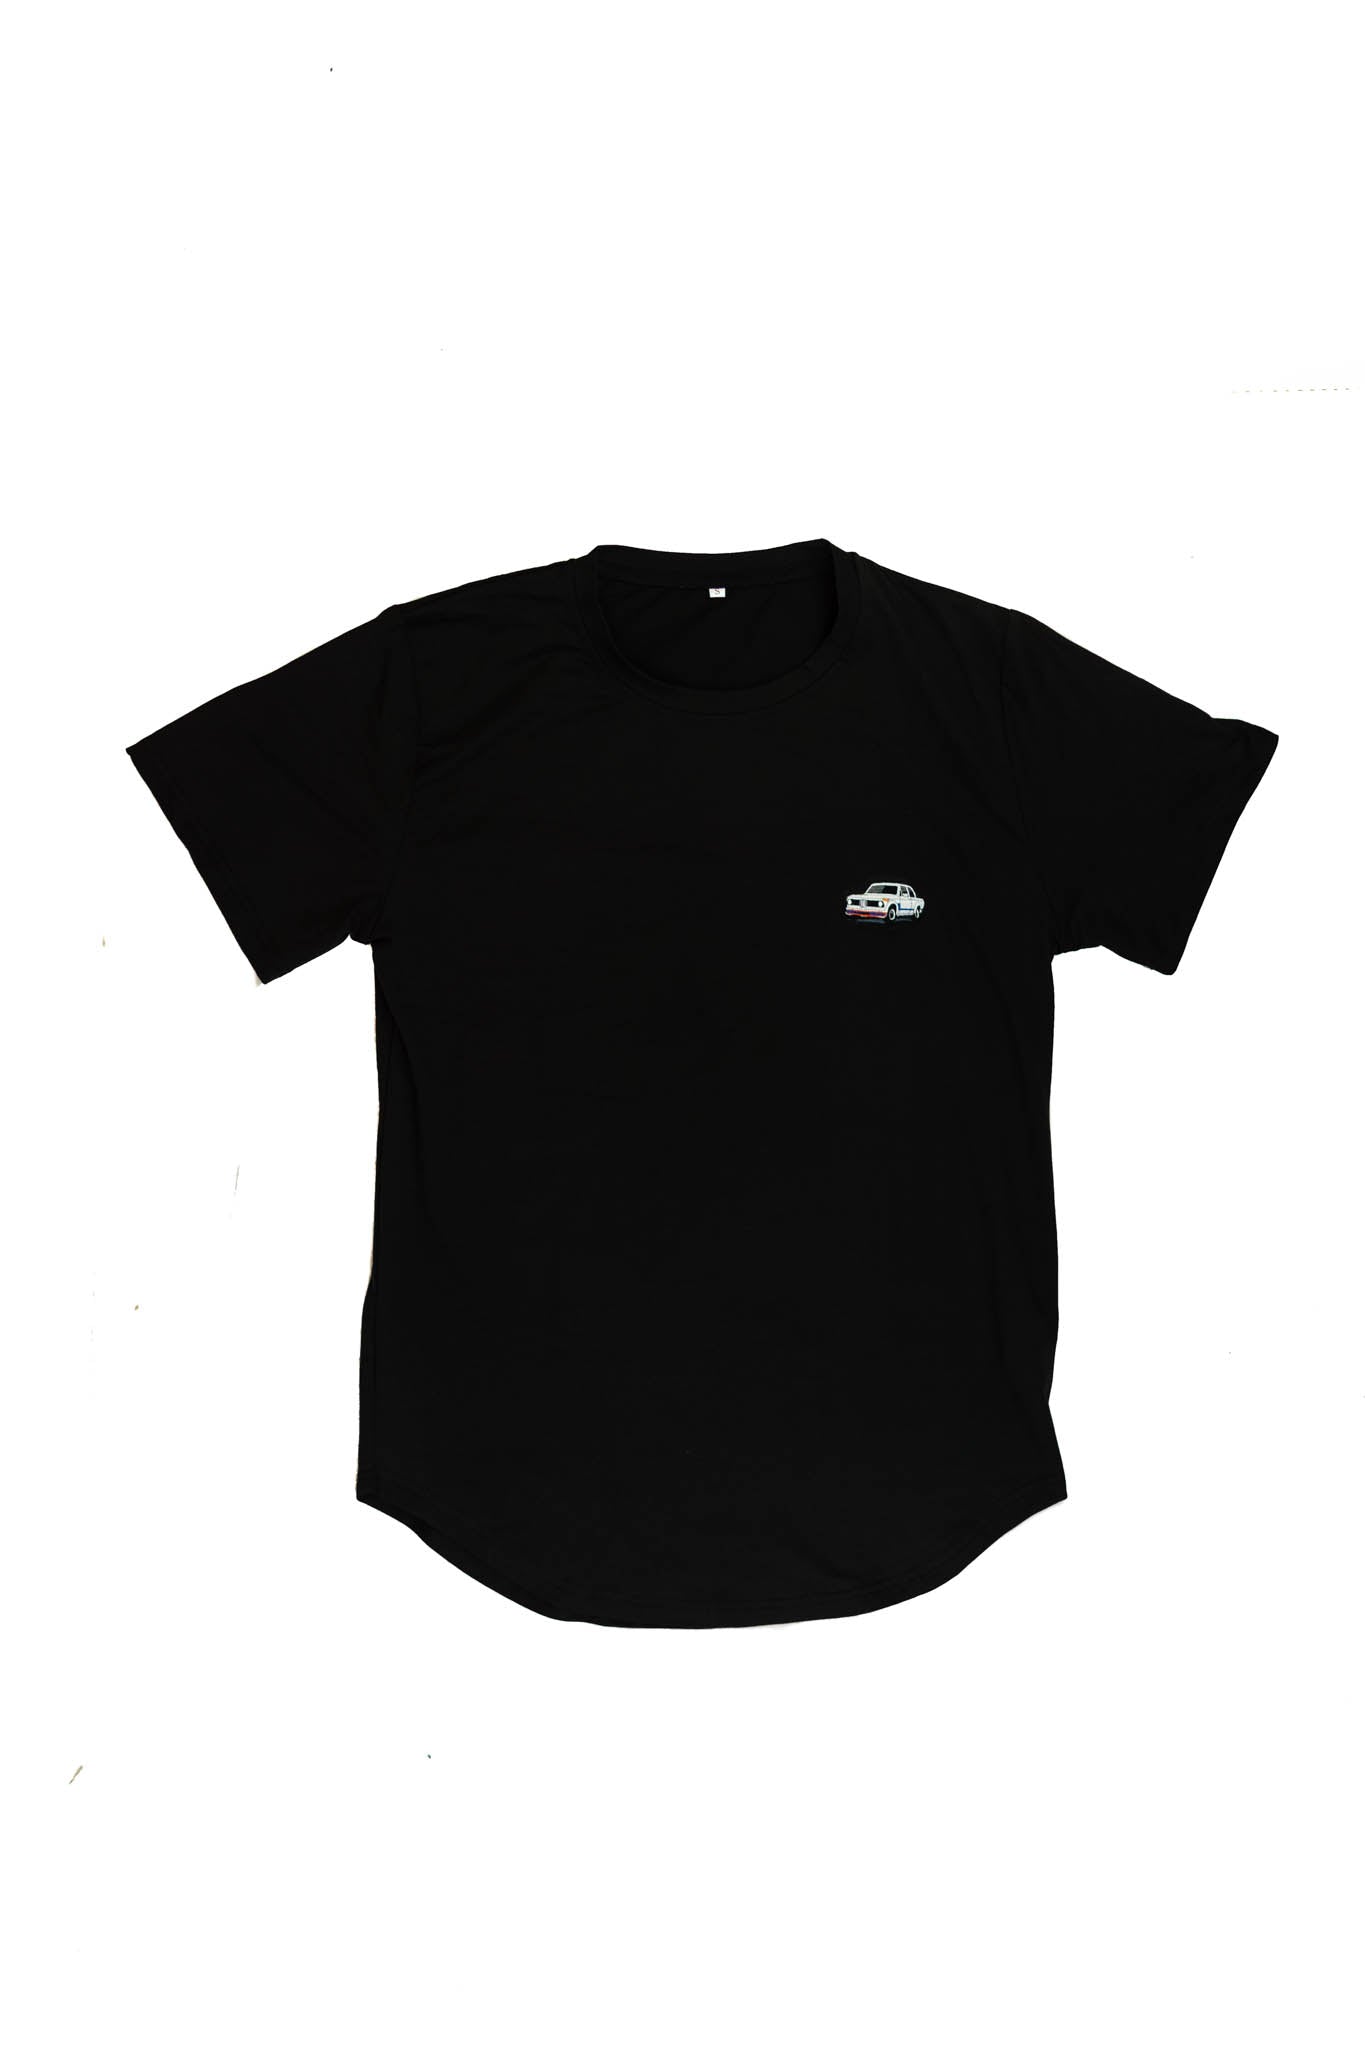 A black BMW 2002 Turbo t-shirt for men. Photo is the front view of the shirt with an embroidered 2002 Turbo. Fabric composition is a polyester and cotton mix. The material is very soft, stretchy, non-transparent. The style of this shirt is short sleeve, with a crewneck neckline.